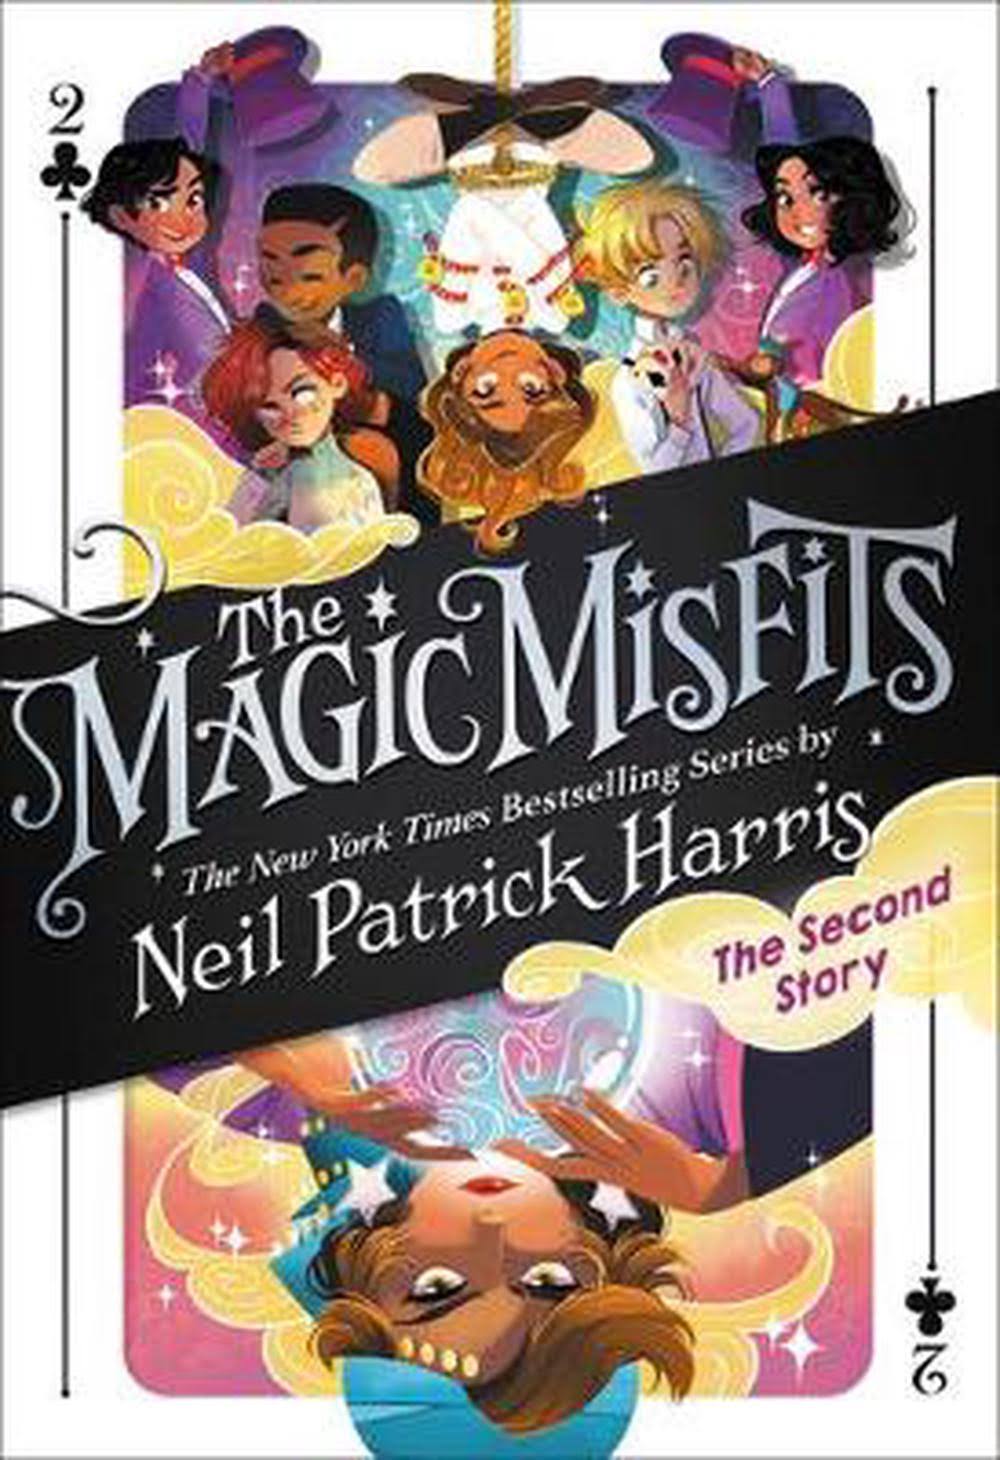 The Magic Misfits: The Second Story [Book]